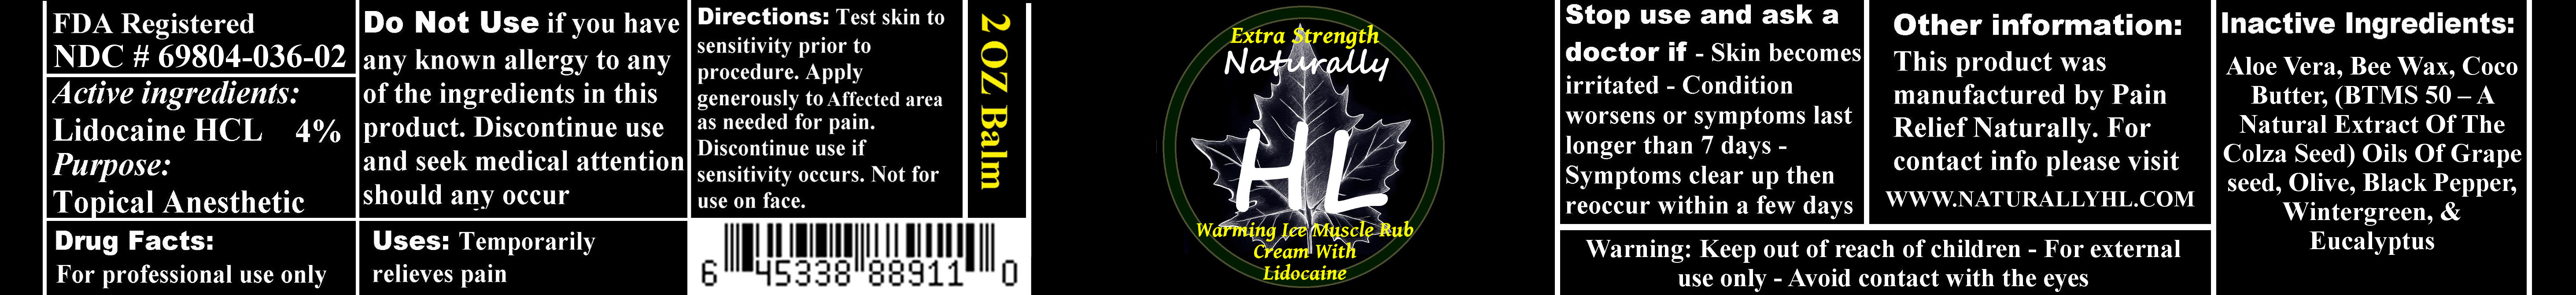 Extra Strength Naturally Hl Warming Ice | Lidocaine Hcl Cream while Breastfeeding